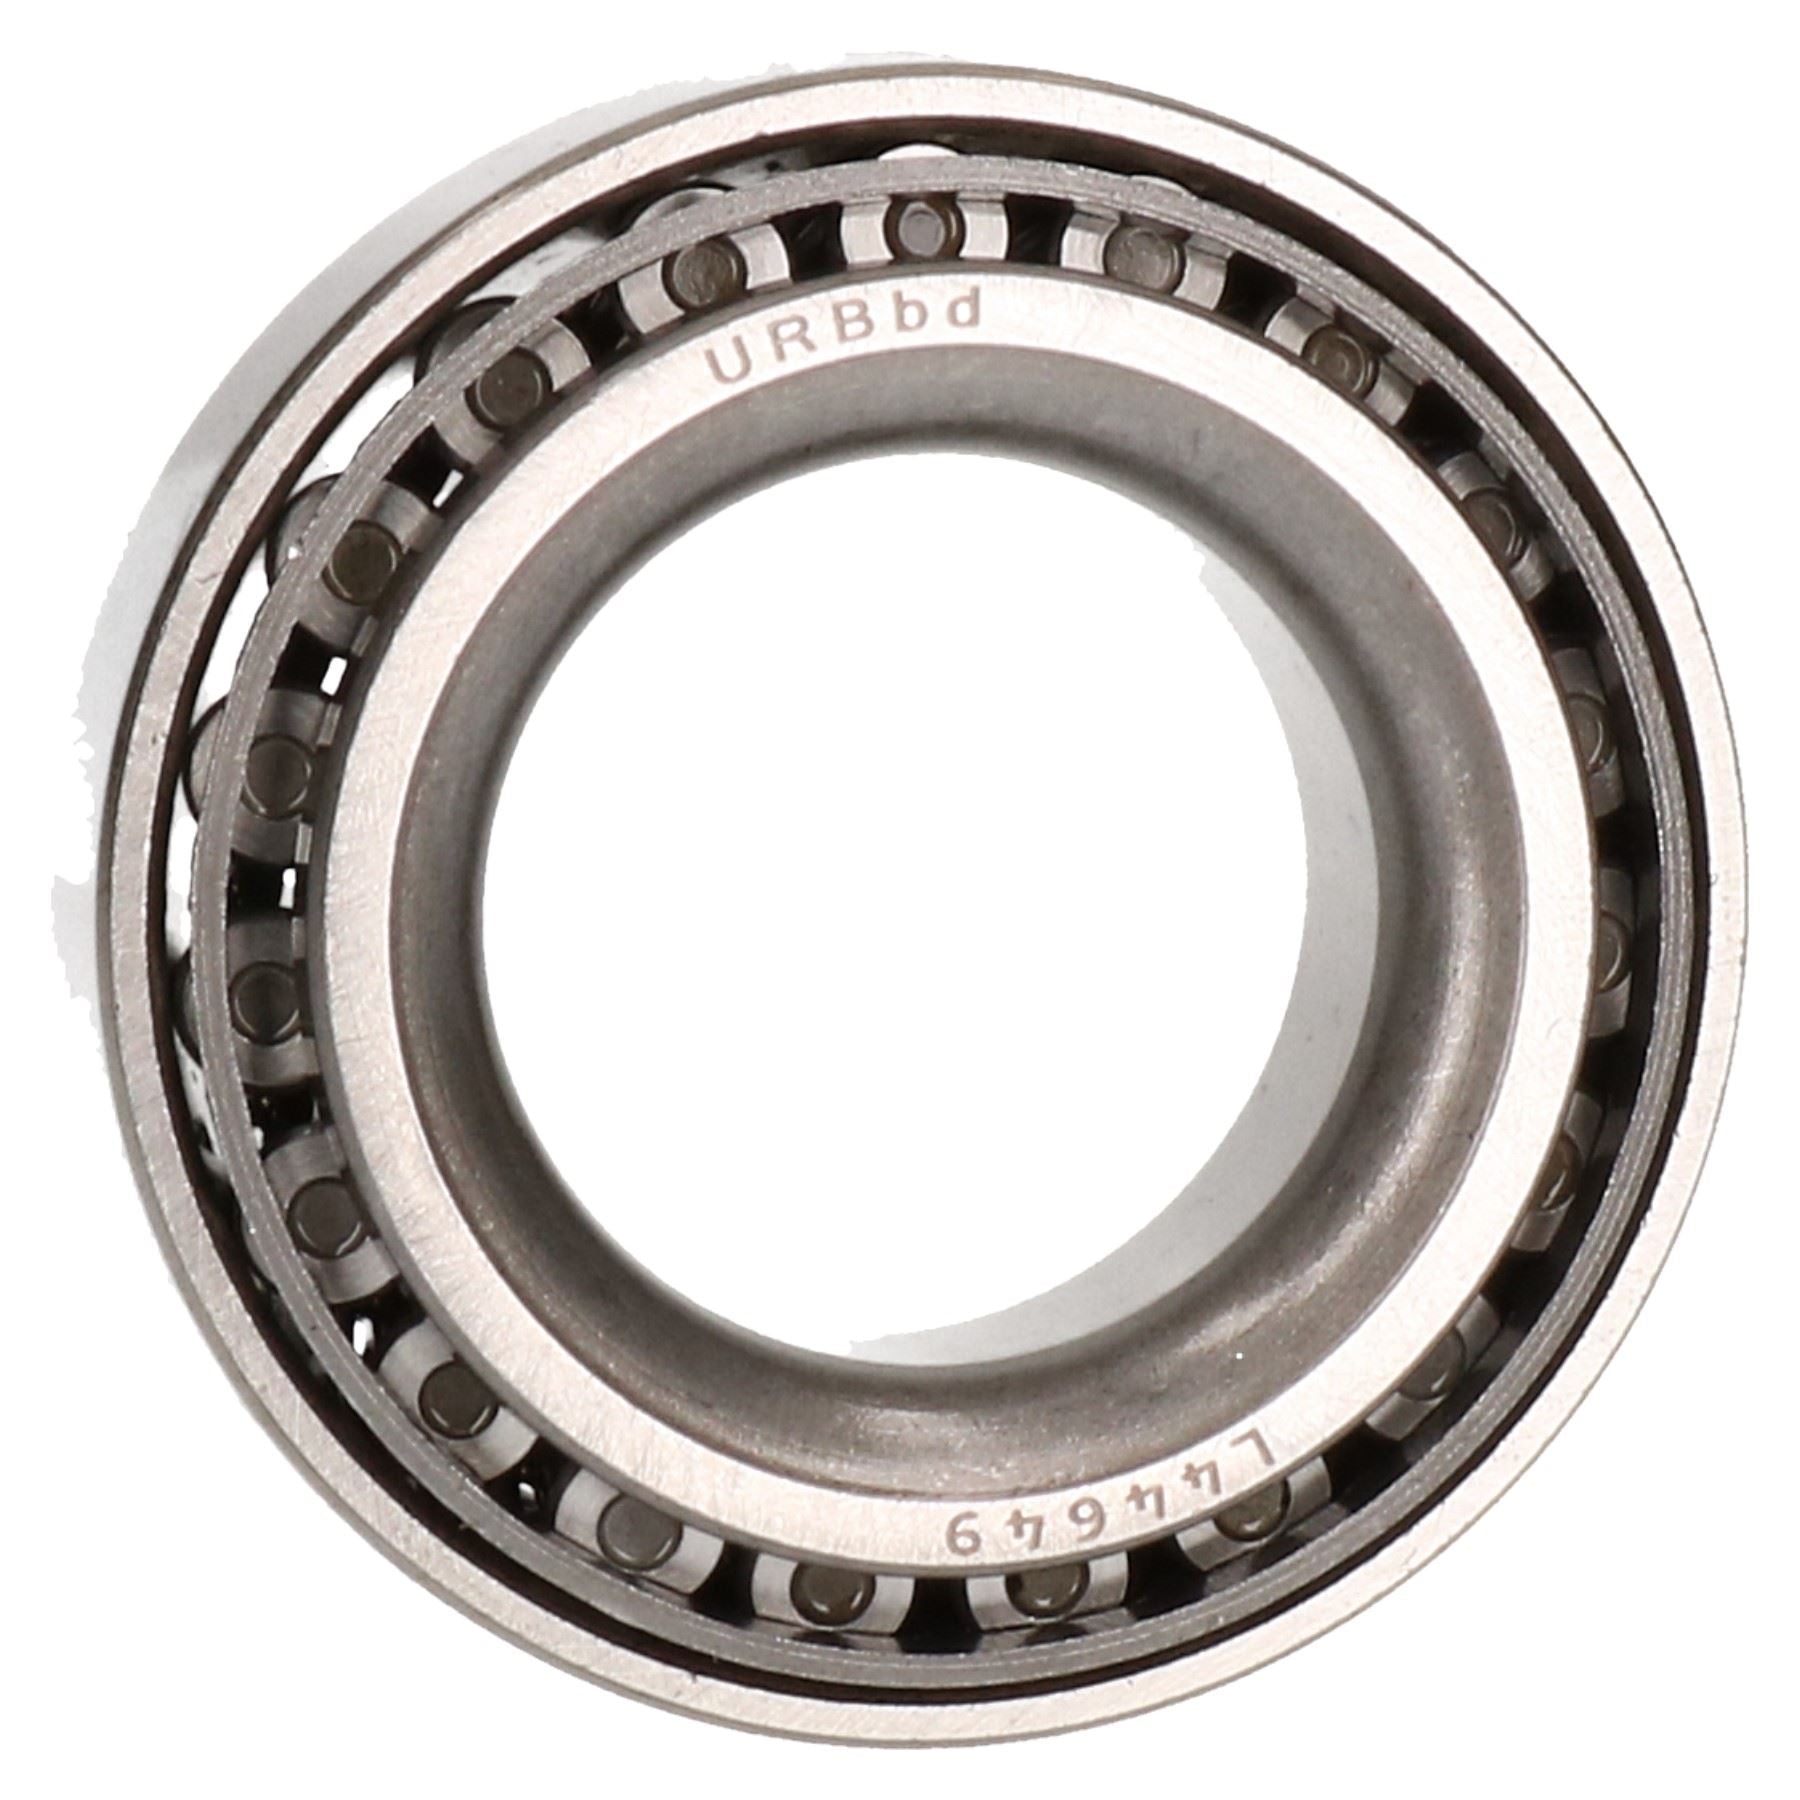 Trailer Taper Roller Bearing / Racer 26.99 x 50.29 x 14.22mm On Meredith & Eyre